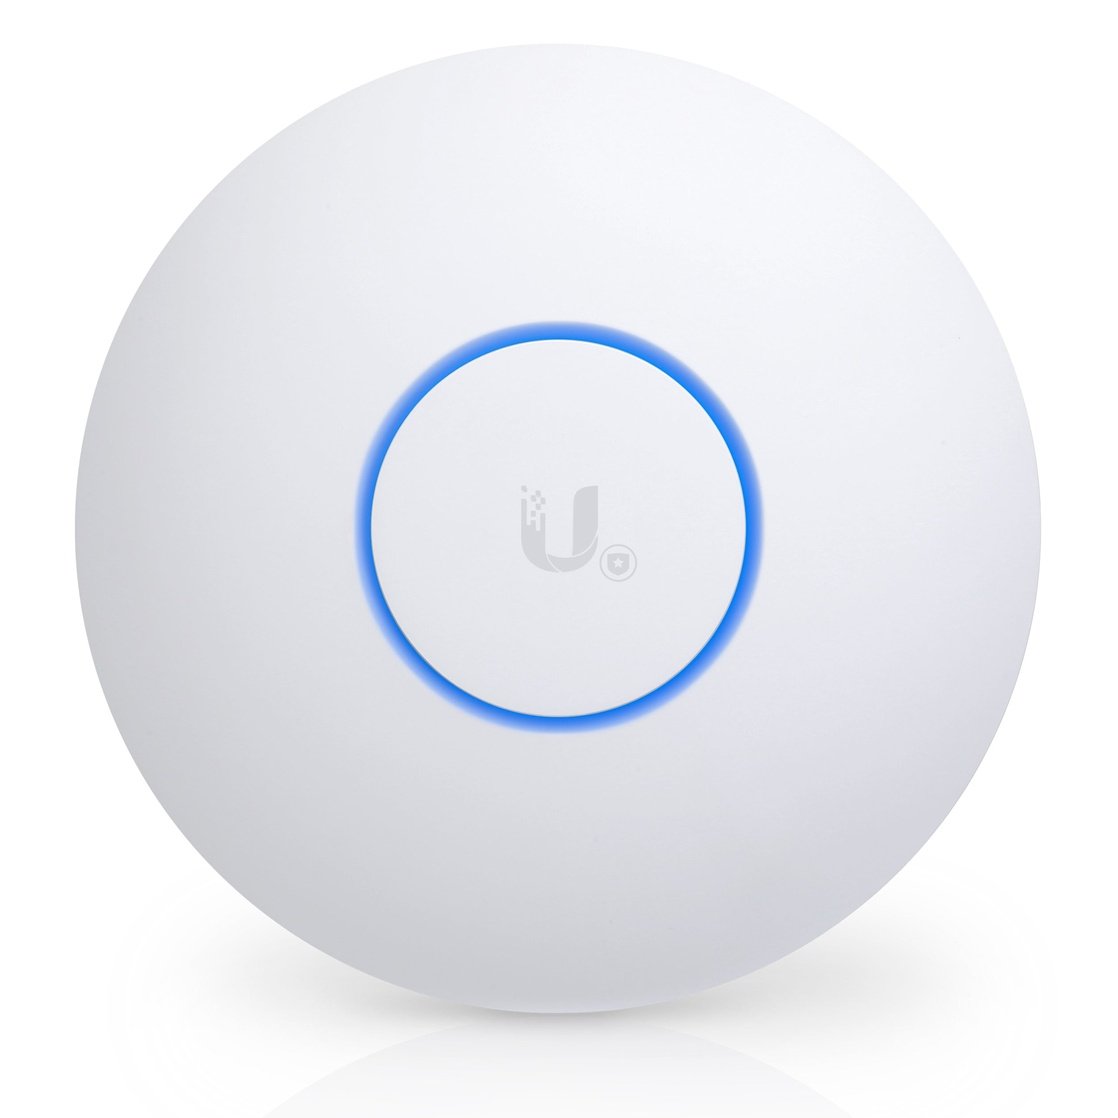 I5adbf404d9_66e3005d-b8c6-4bda-8df0-83fd7ee2a44e Ubiquiti Unifi Access Point NanoHD / Indoor / 2,4 &amp; 5 GHz / AC Wave 2 / 4x4 MIMO / UAP-NanoHD-3 / 3er Pack Accesspoint ubiquiti WIFI wifi 6 router